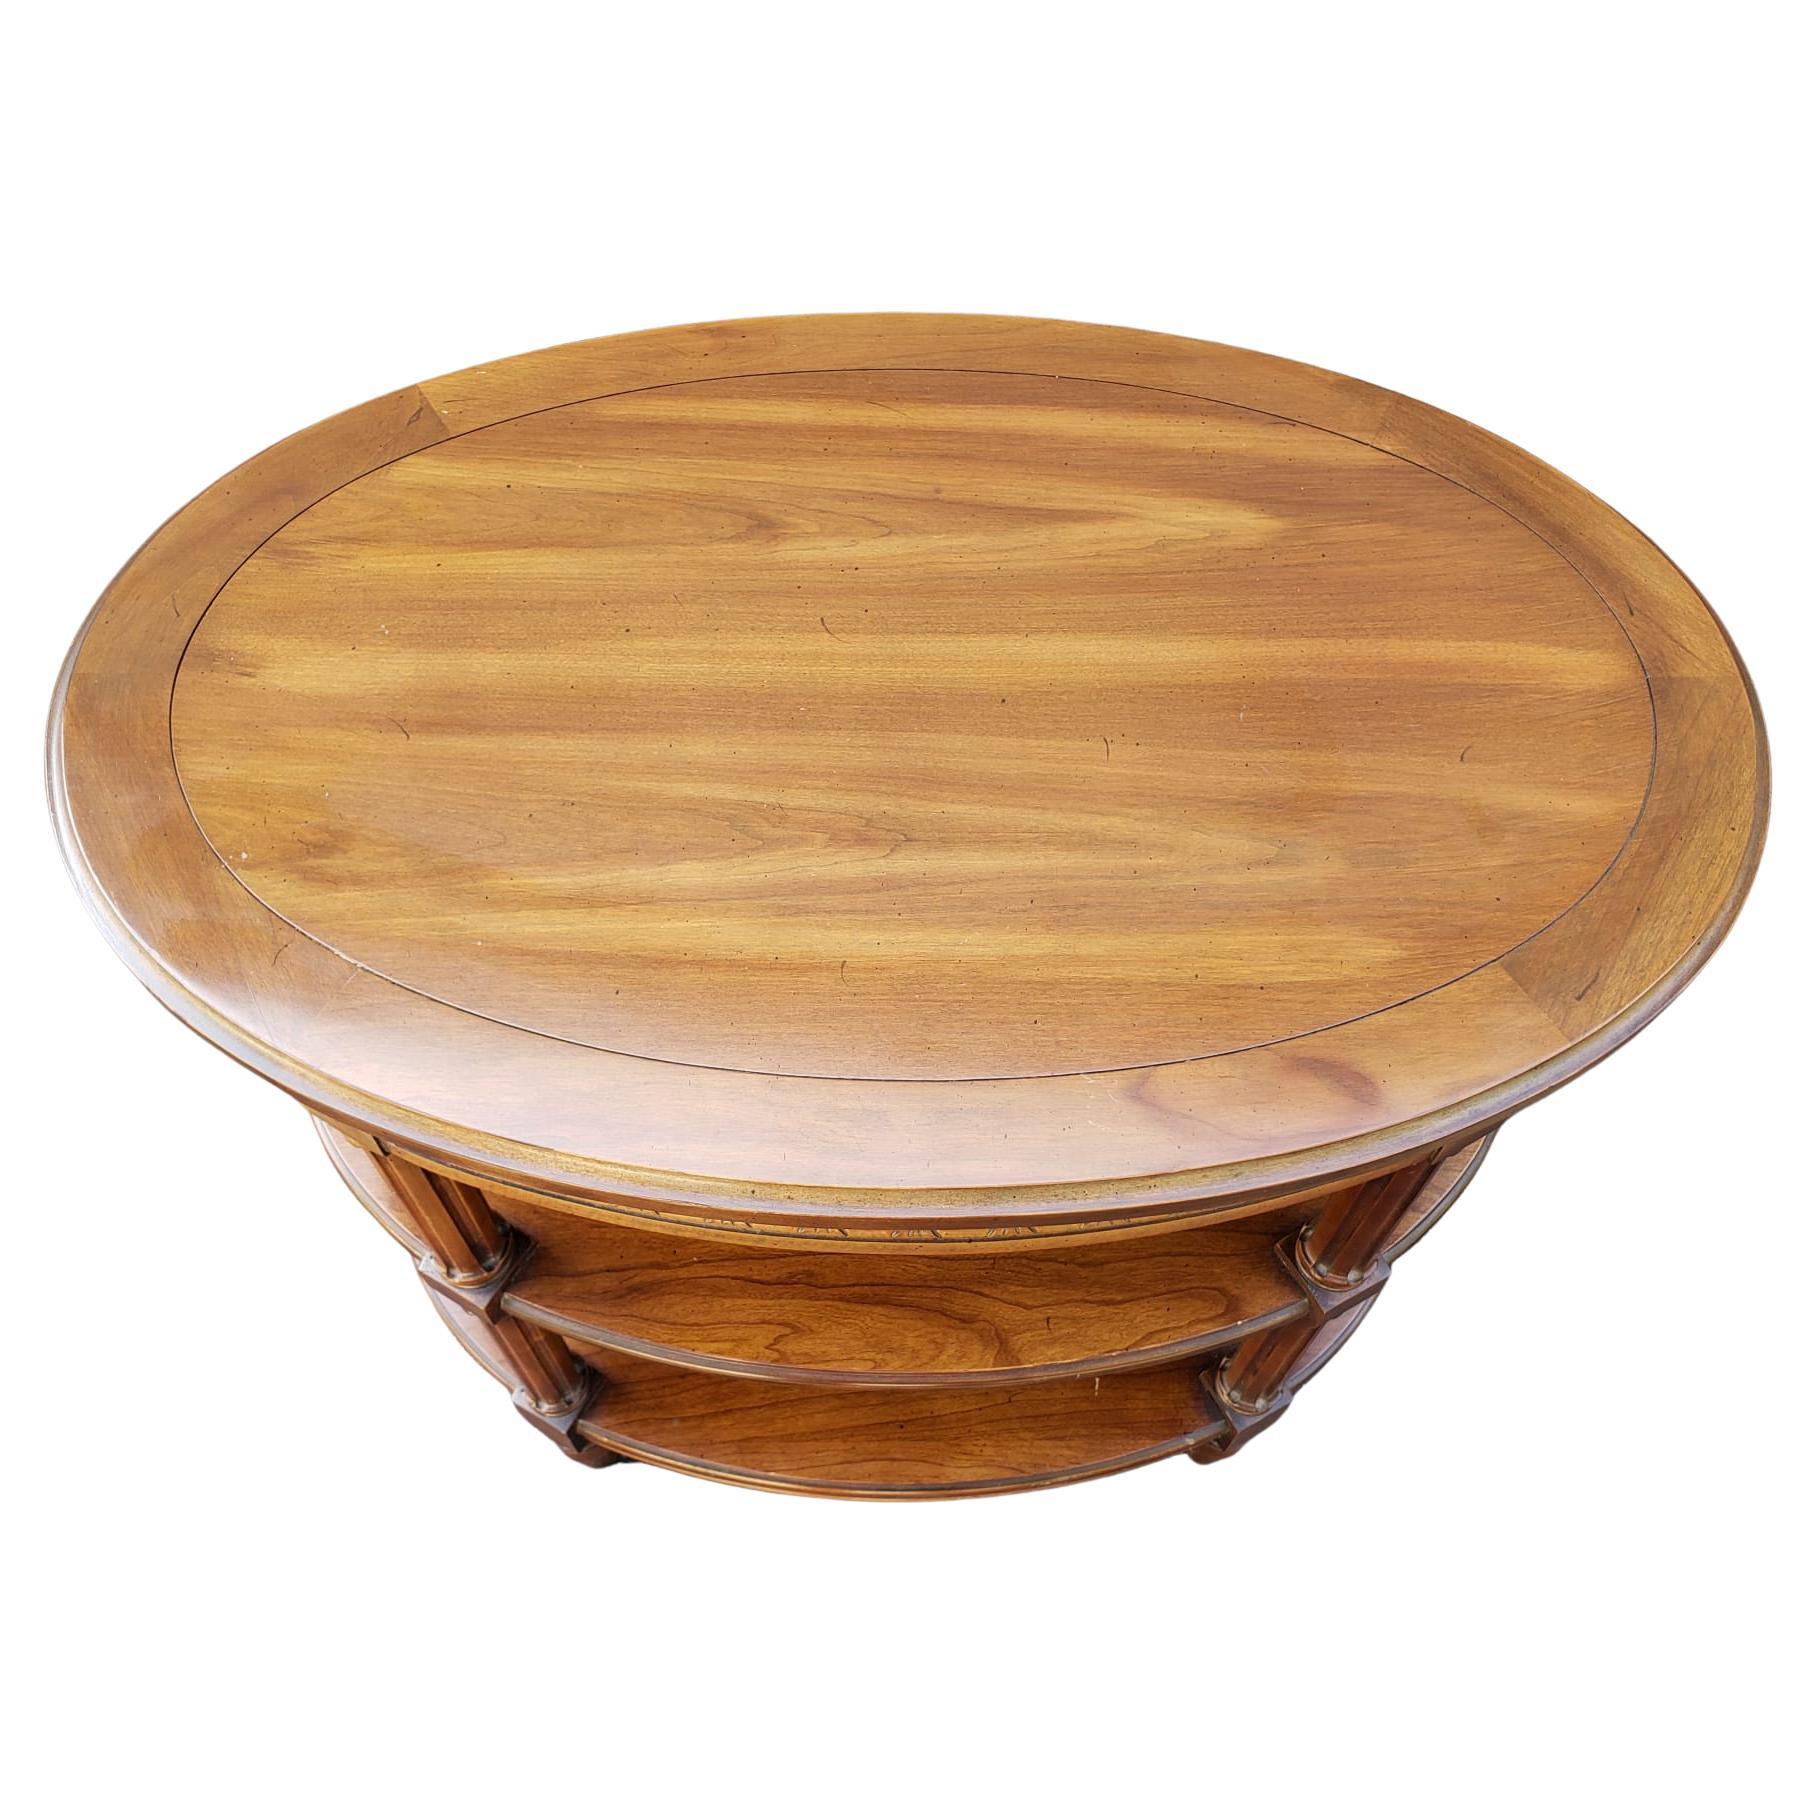 An American Classical Three-Tier Oval Fruitwood Side Table in great condition with hand rub finish. Measures 19